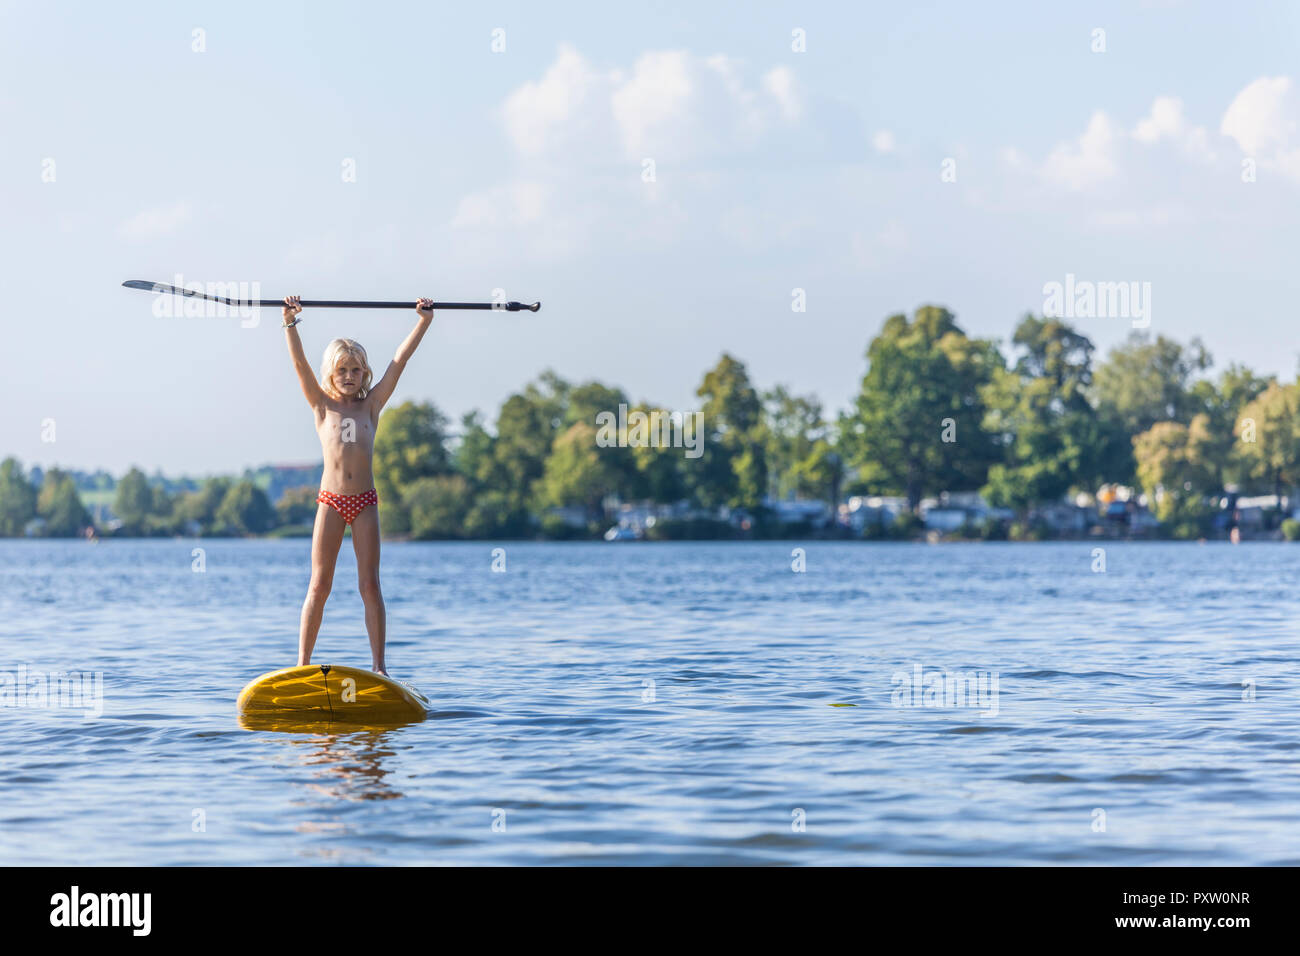 Young girl stand up paddle surfing Stock Photo